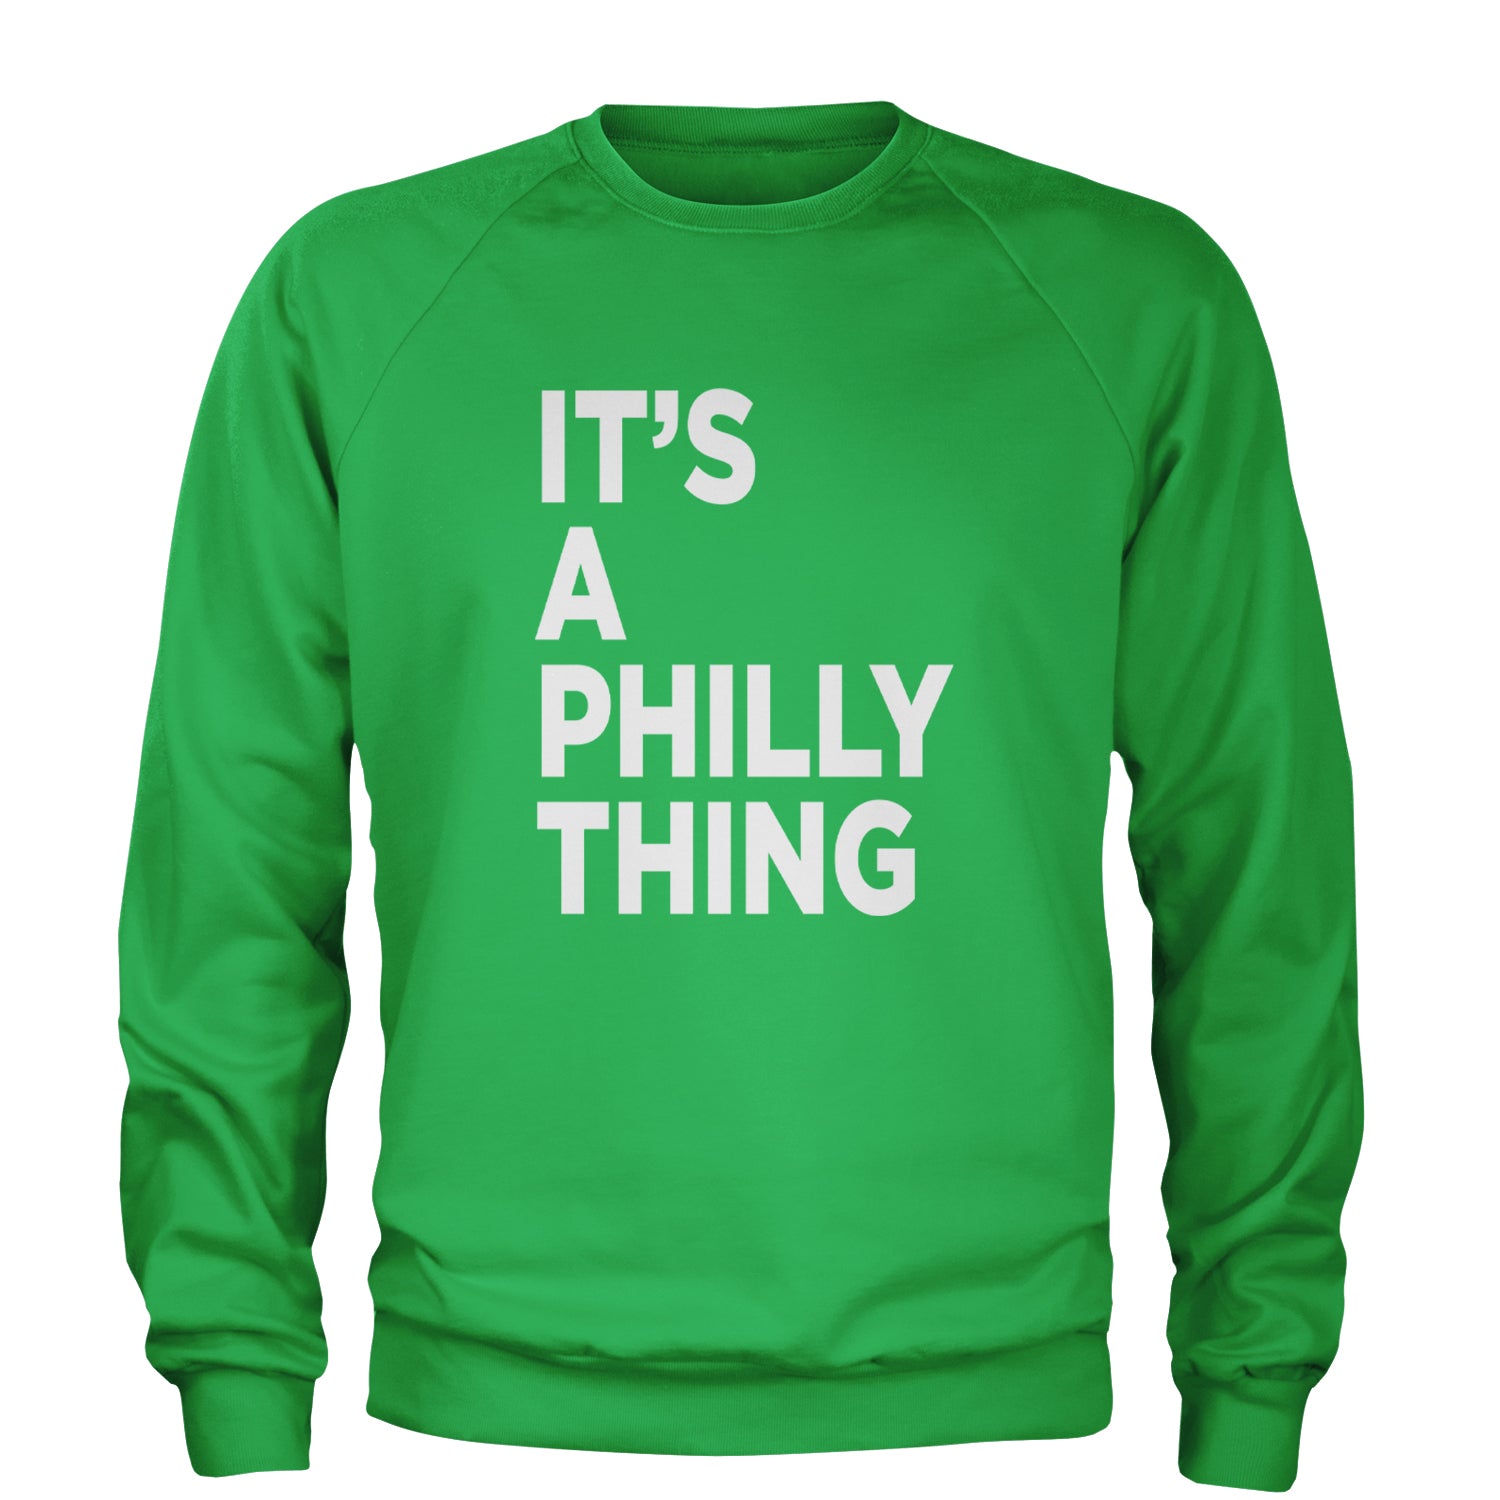 PHILLY It's A Philly Thing Adult Crewneck Sweatshirt baseball, dilly, filly, football, jawn, morgan, Philadelphia, philli by Expression Tees